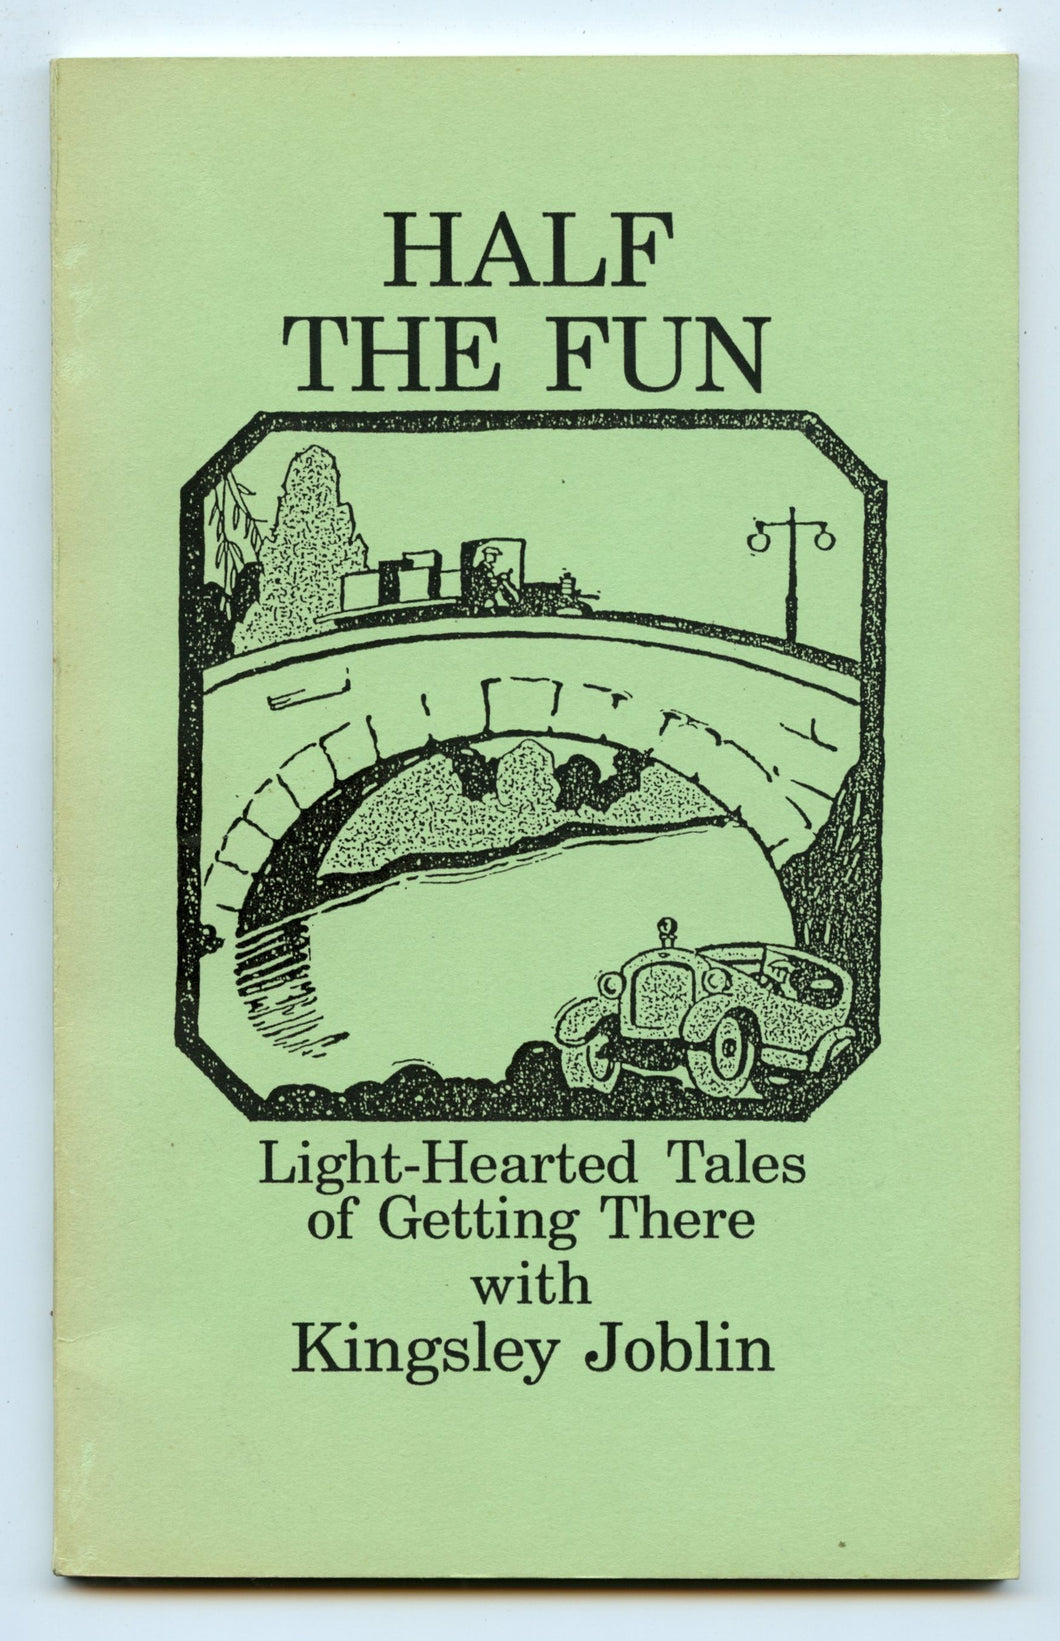 Half The Fun: Light-Hearted Tales of Getting There